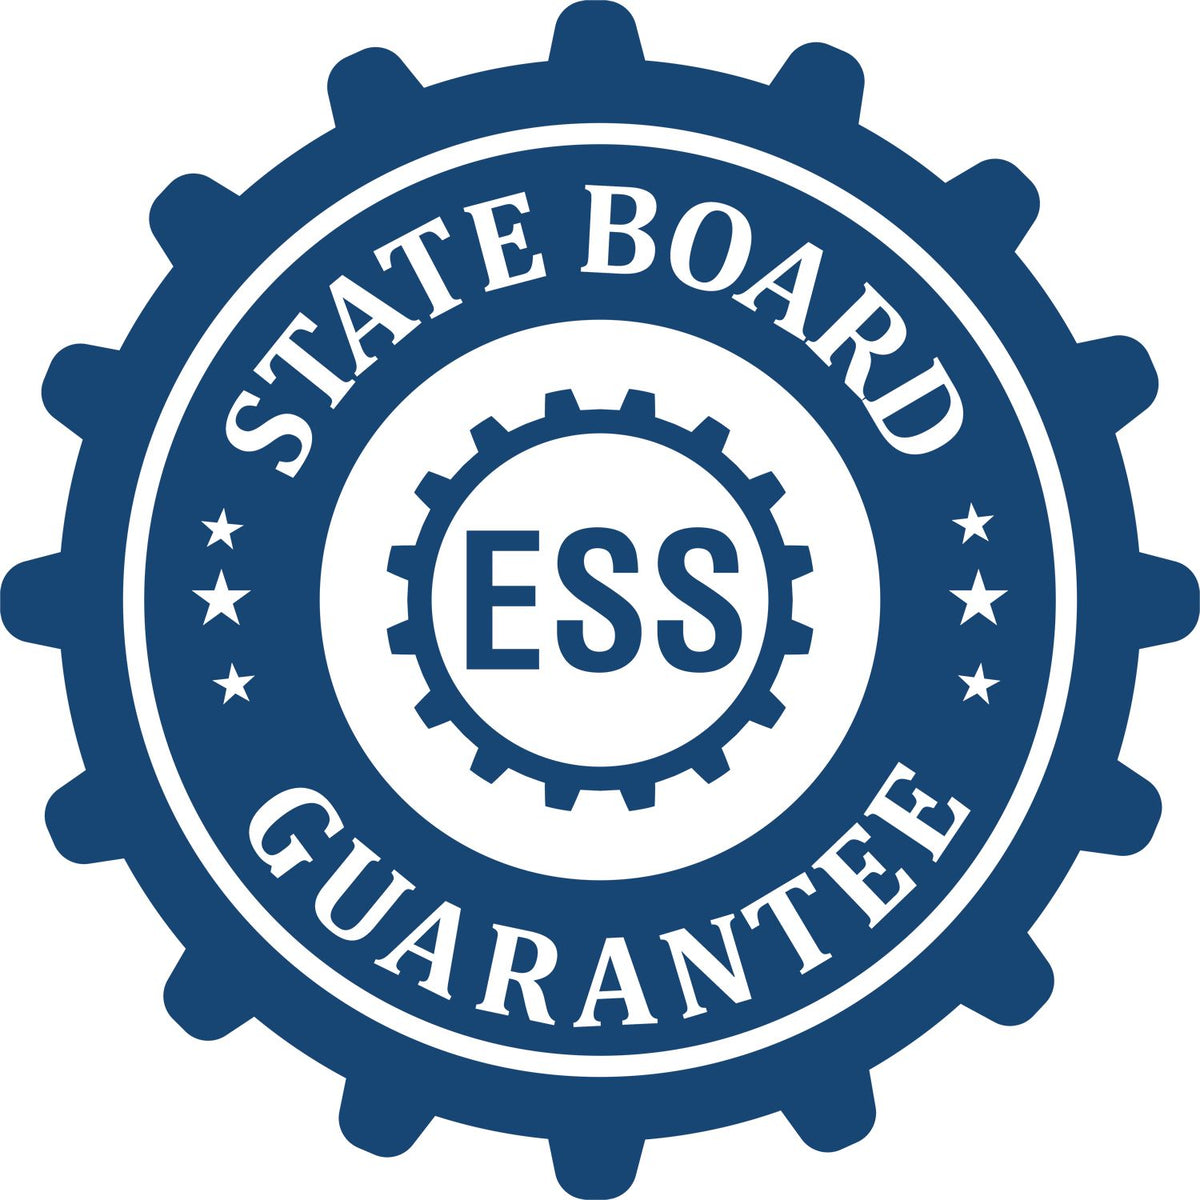 An emblem in a gear shape illustrating a state board guarantee for the Wooden Handle Utah State Seal Notary Public Stamp product.